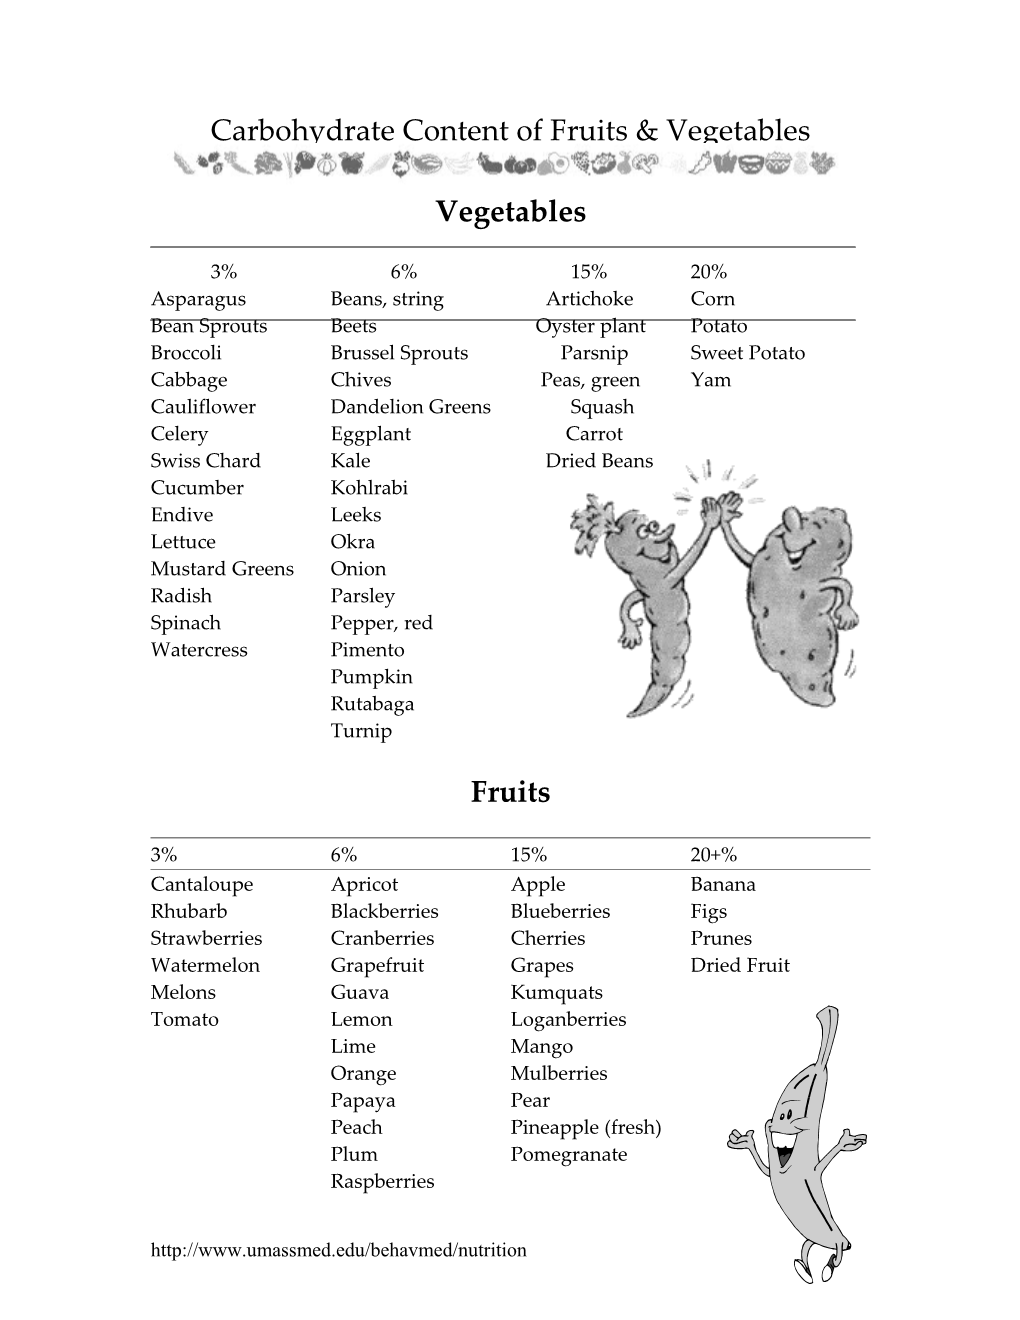 Carbohydrate Content of Fruits & Vegetables